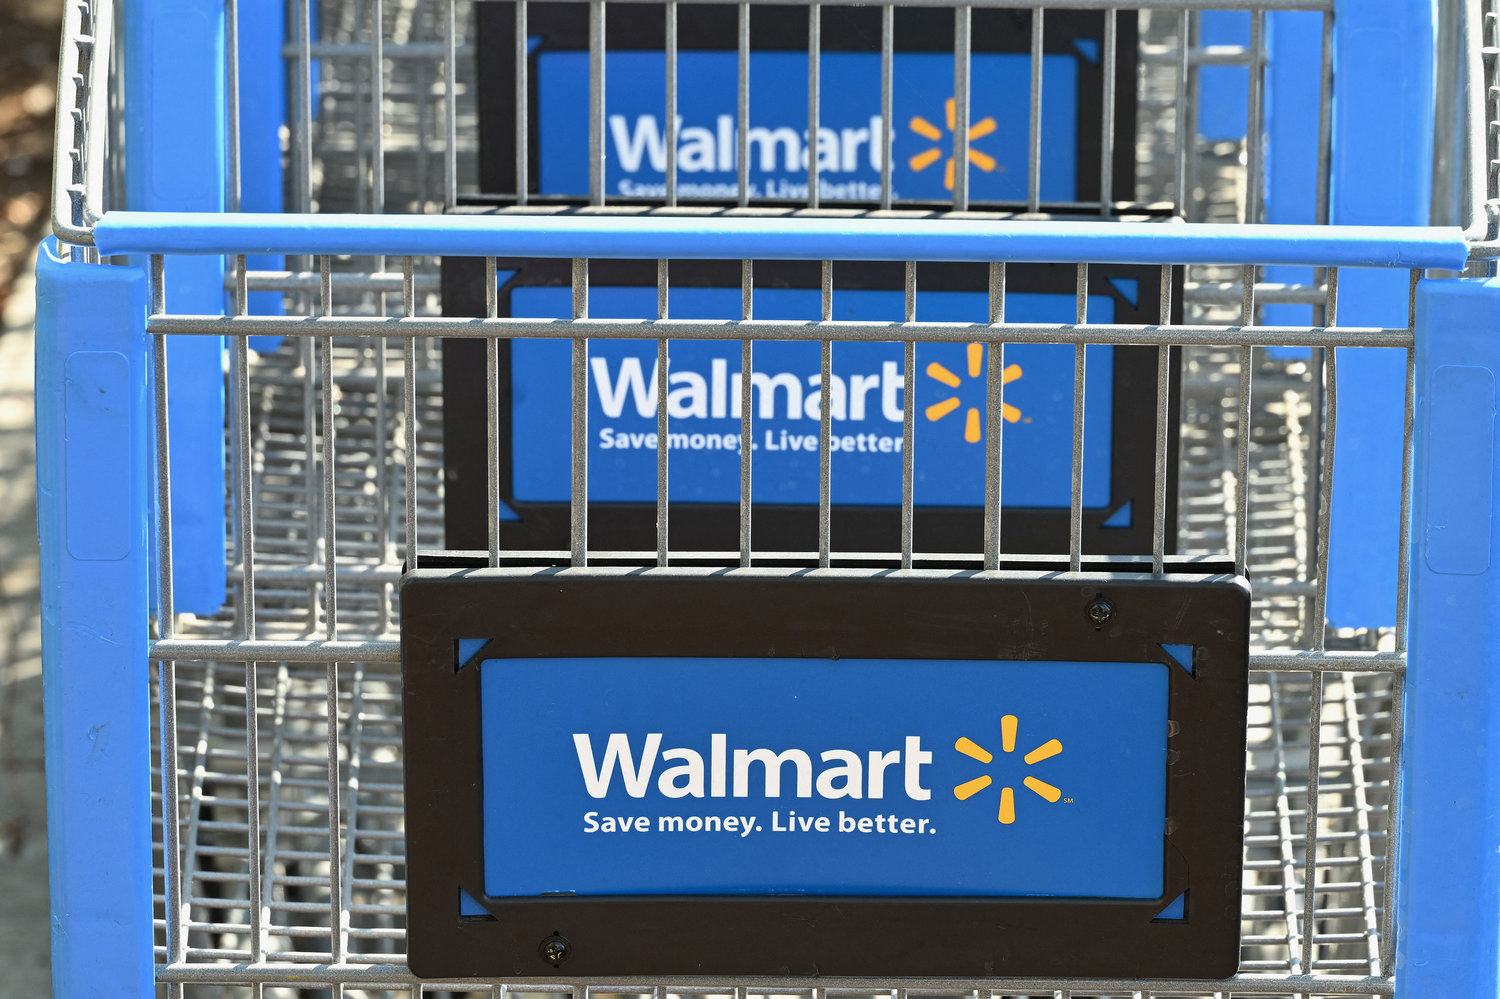 Walmart agreed to pay $3.1 billion to resolve lawsuits accusing the pharmacy of selling drugs that contributed to the opioid epidemic. (Robyn Beck/AFP via Getty Images/TNS)